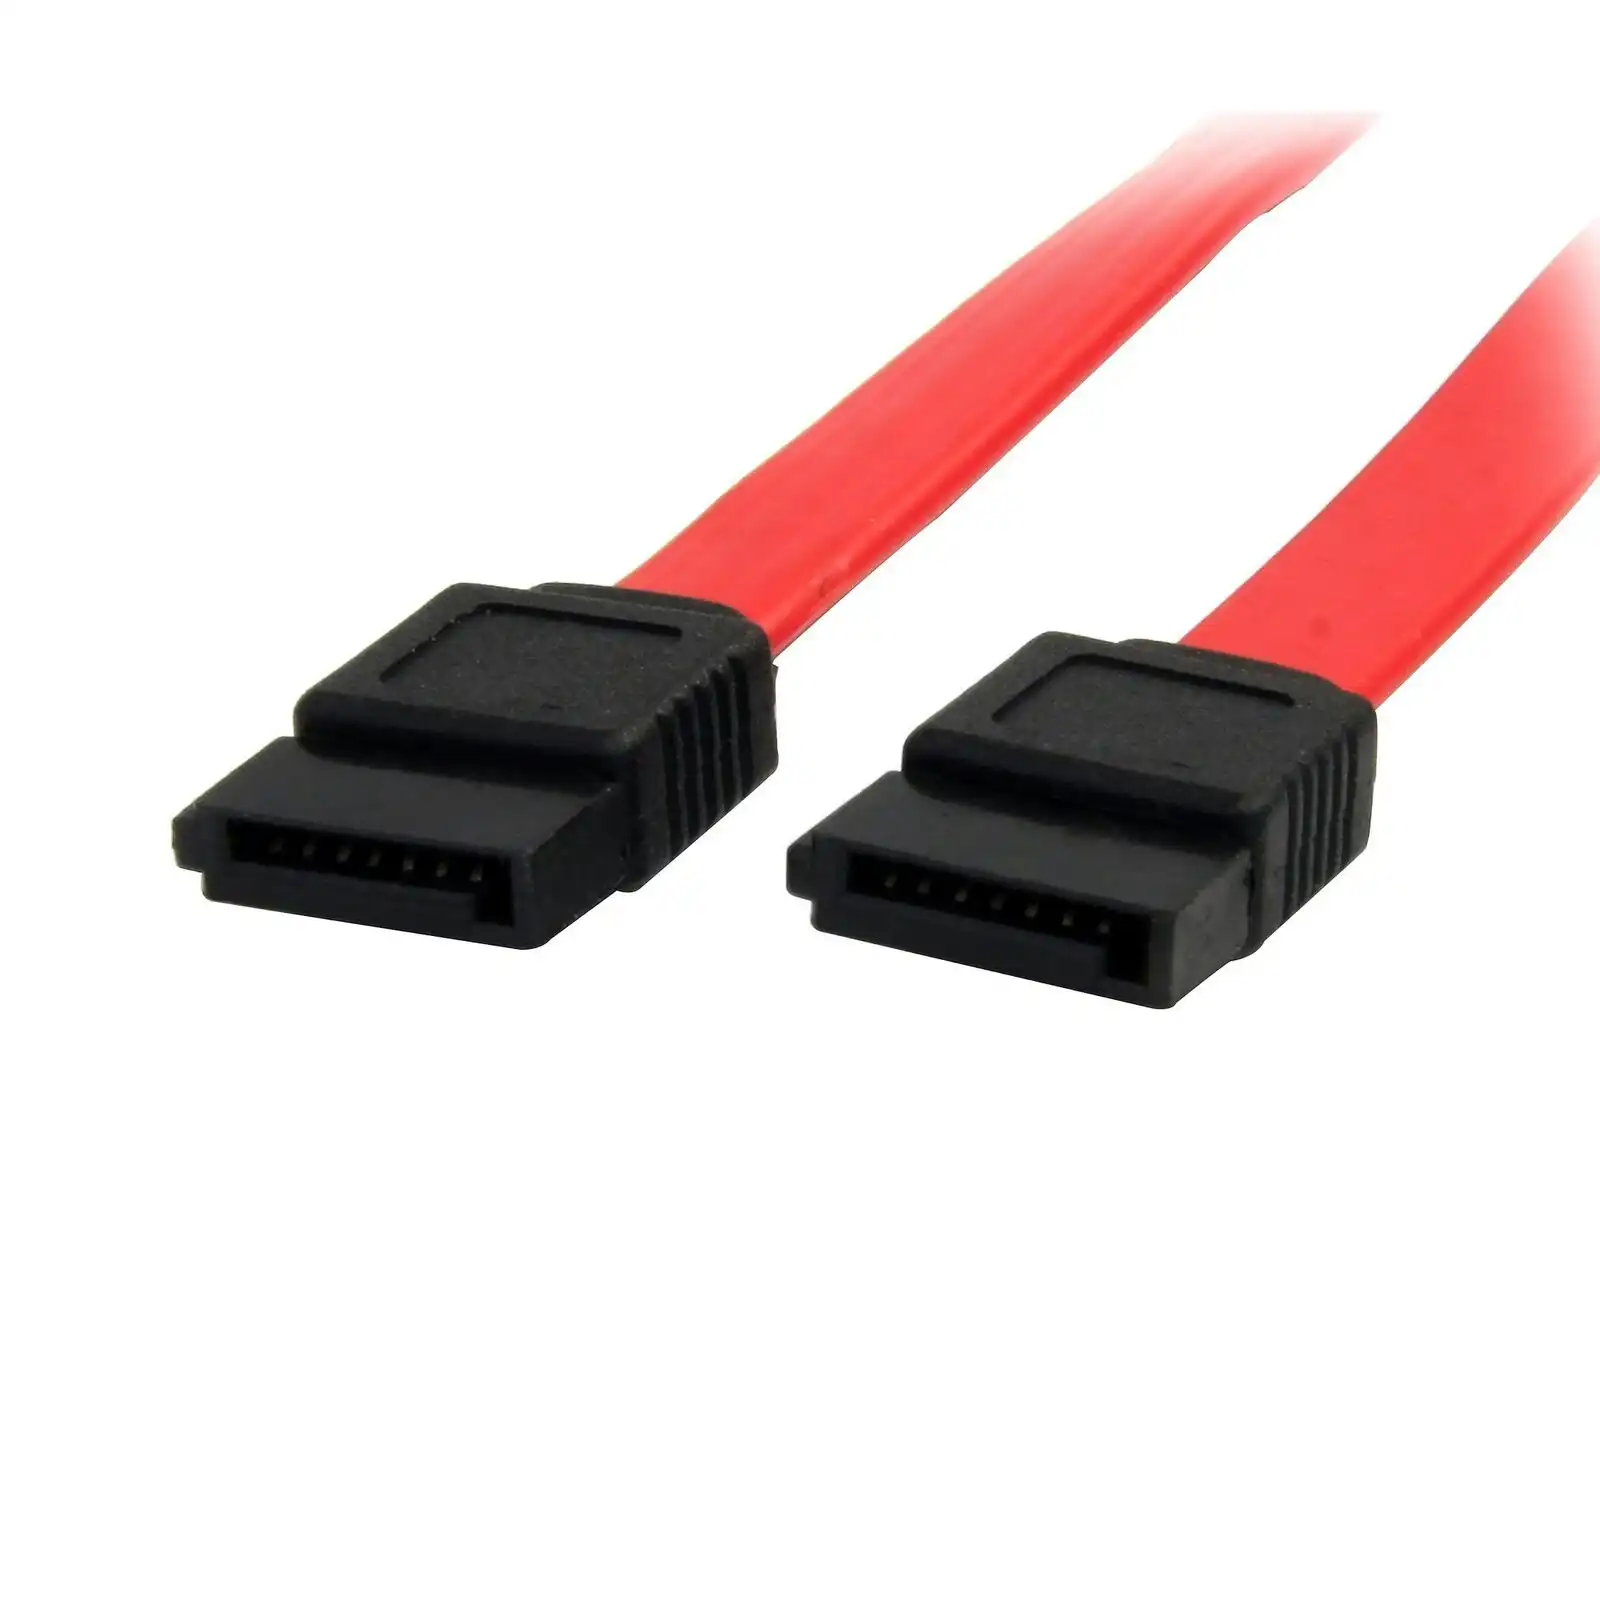 Star Tech 18in SATA 3.0 Serial ATA Cable 6Gbps For HDD/SSD/DVD Drive Red